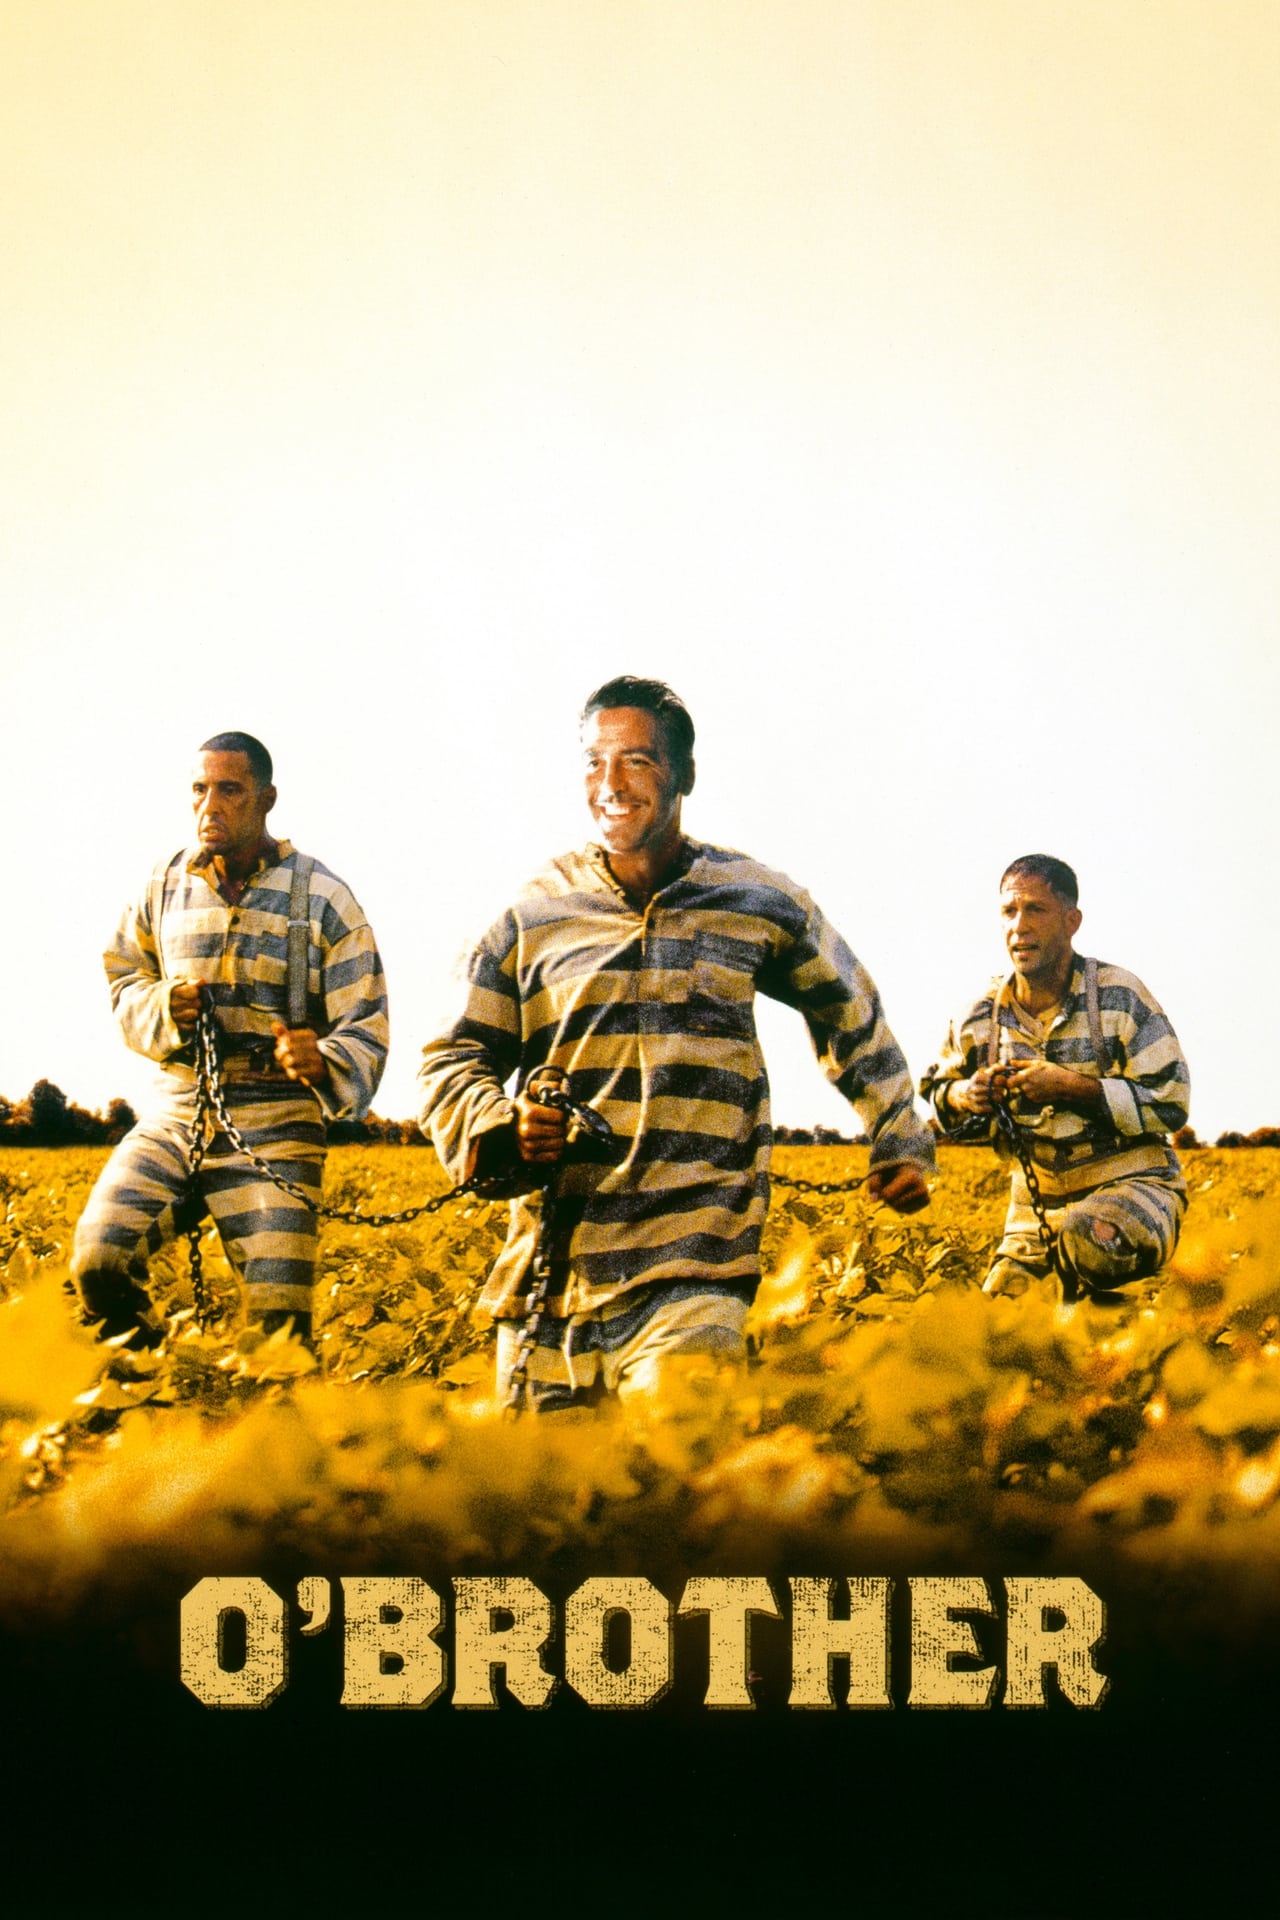 O Brother, Where Art Thou? wiki, synopsis, reviews, watch and download